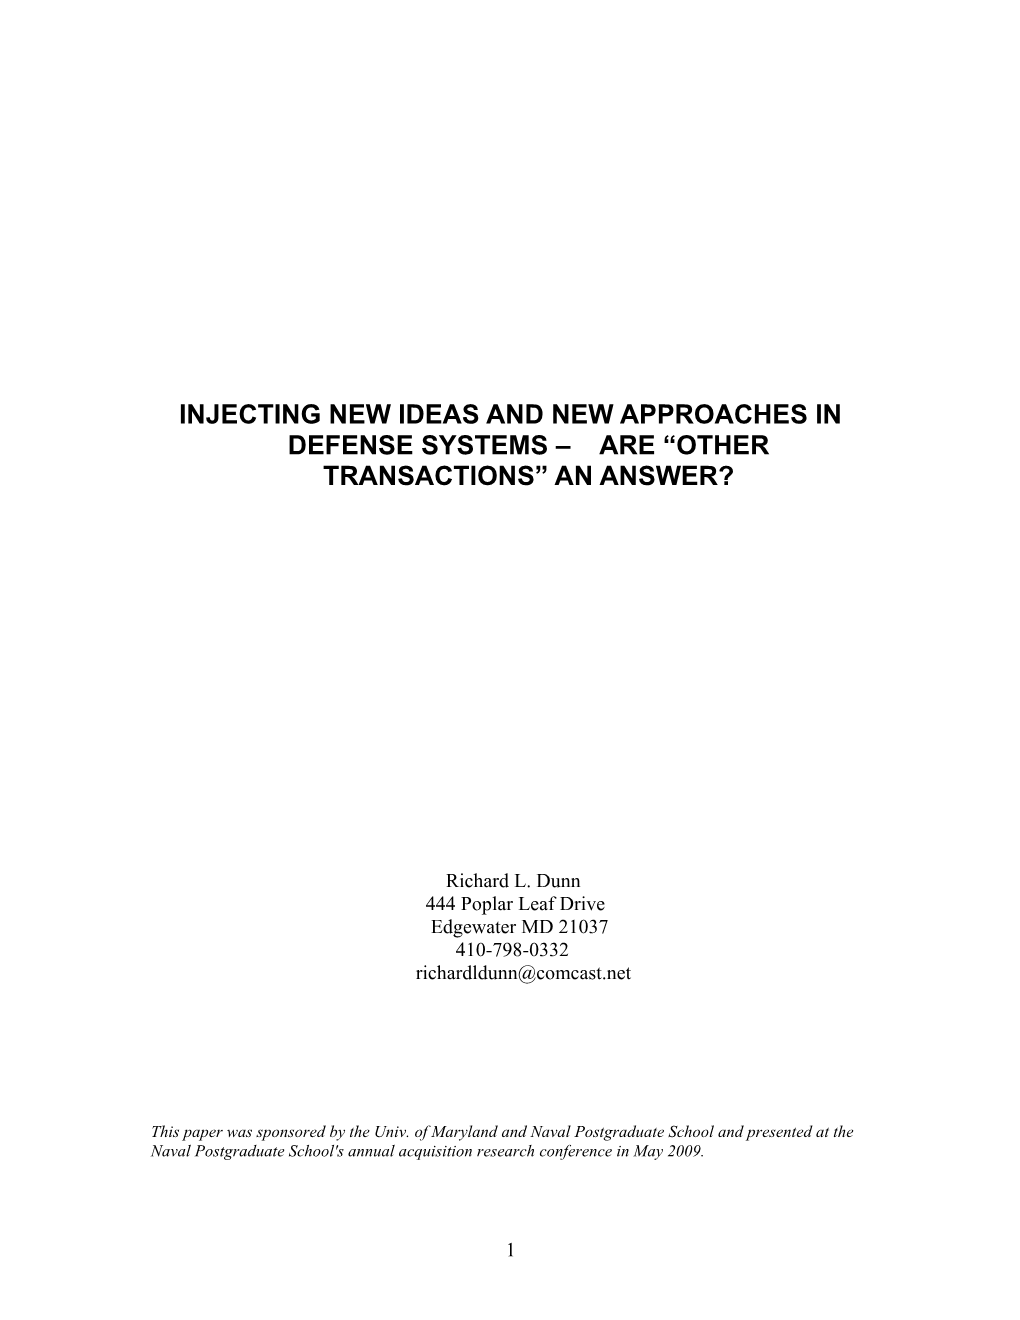 Paper Draft Injecting New Ideas and New Approaches in Defense Systems Are Other Transactions